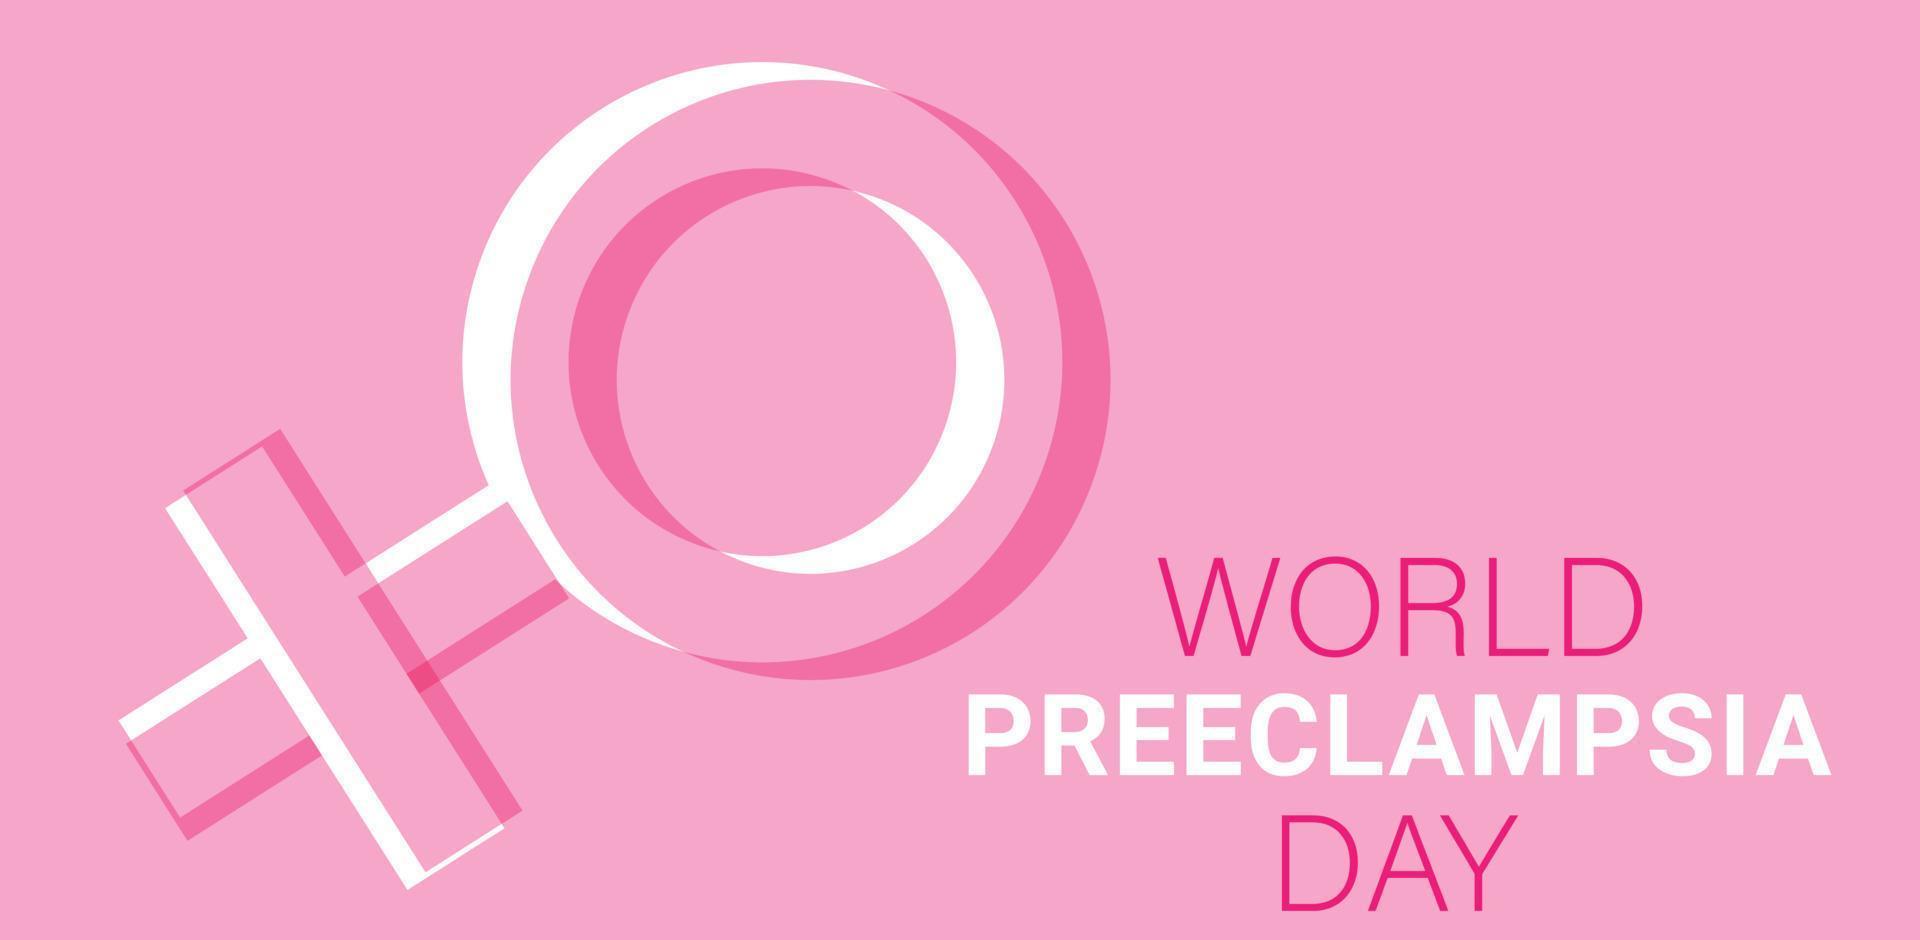 World Preeclampsia day. Template for background, banner, card, poster. vector illustration.